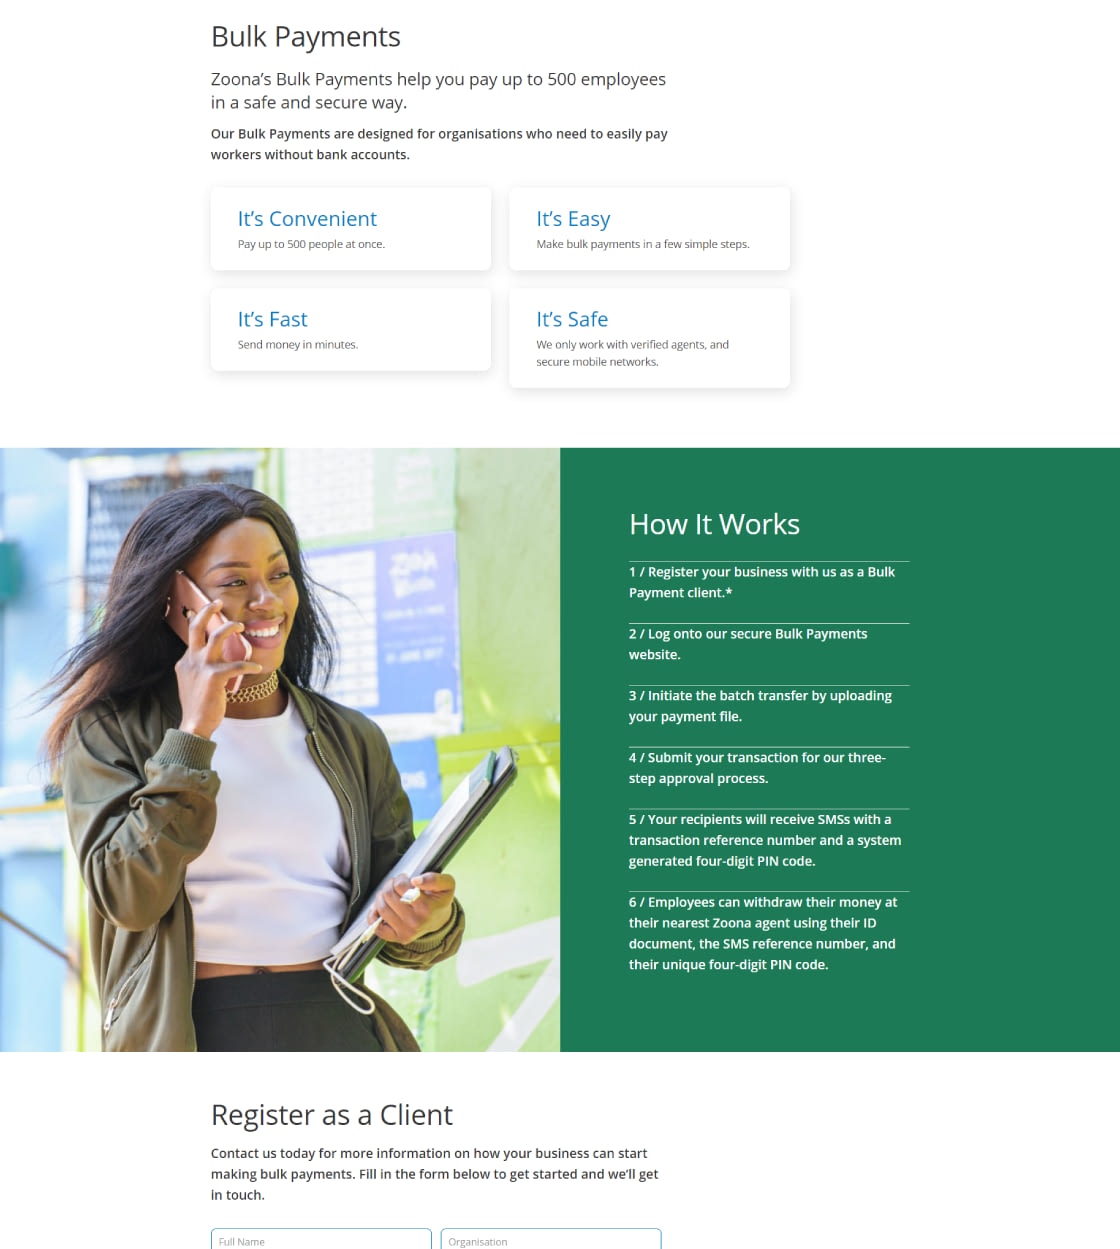 Website Design for African Fintech Startup Zoona - Product Feature Page UI Showcase